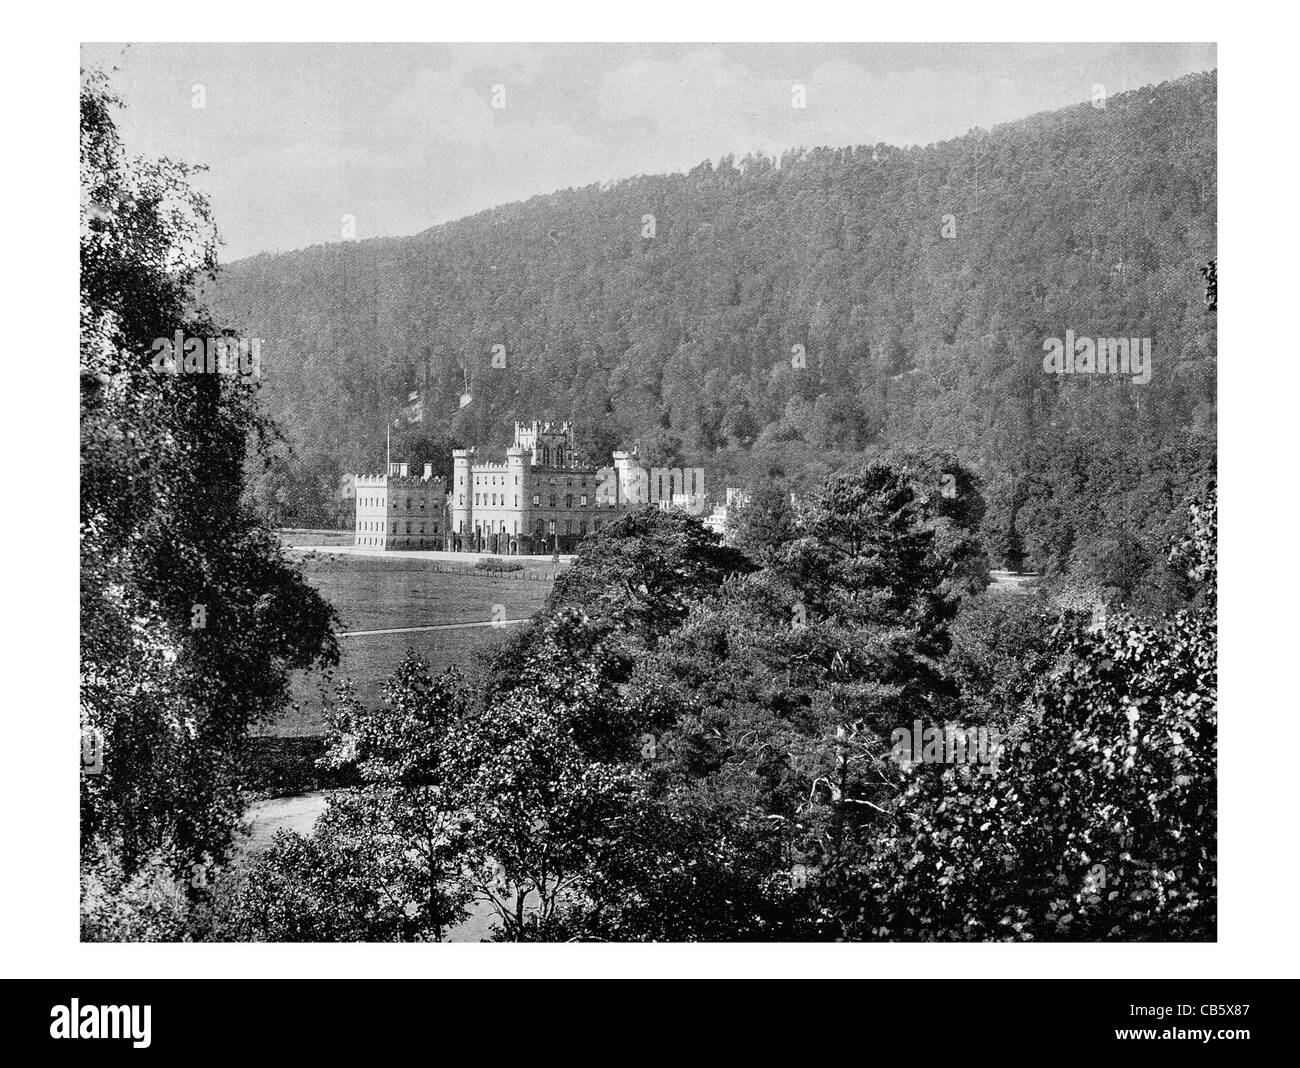 Taymouth Castle Highlands Scotland Neo Gothic boutique hotel Stock Photo